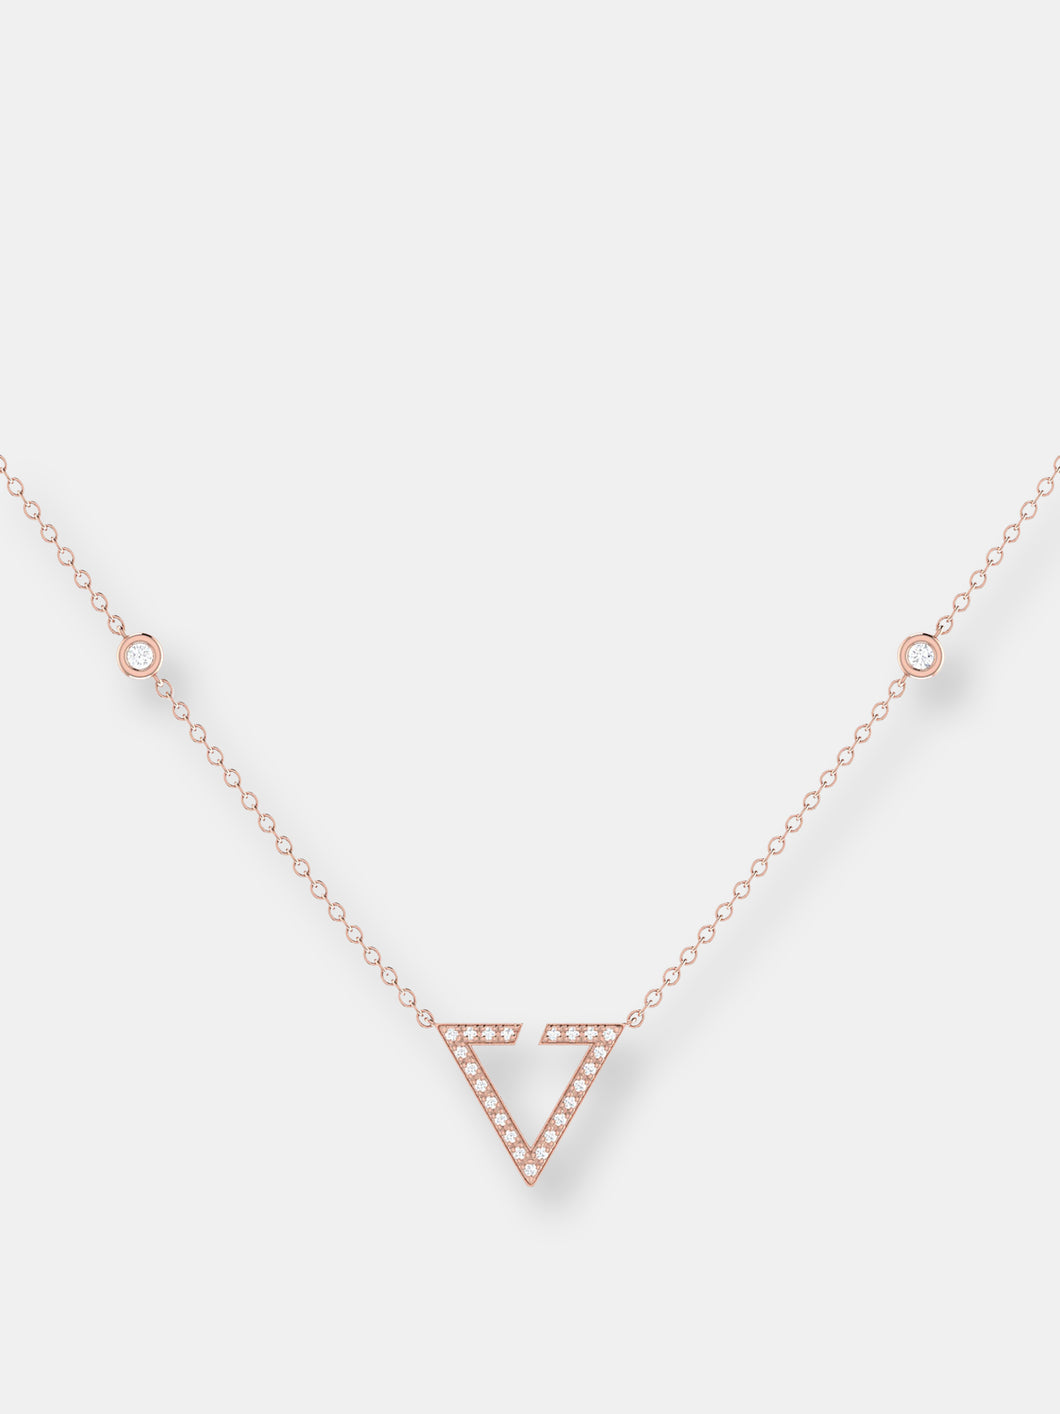 Skyline Triangle Diamond Necklace in 14K Rose Gold Vermeil on Sterling Silver